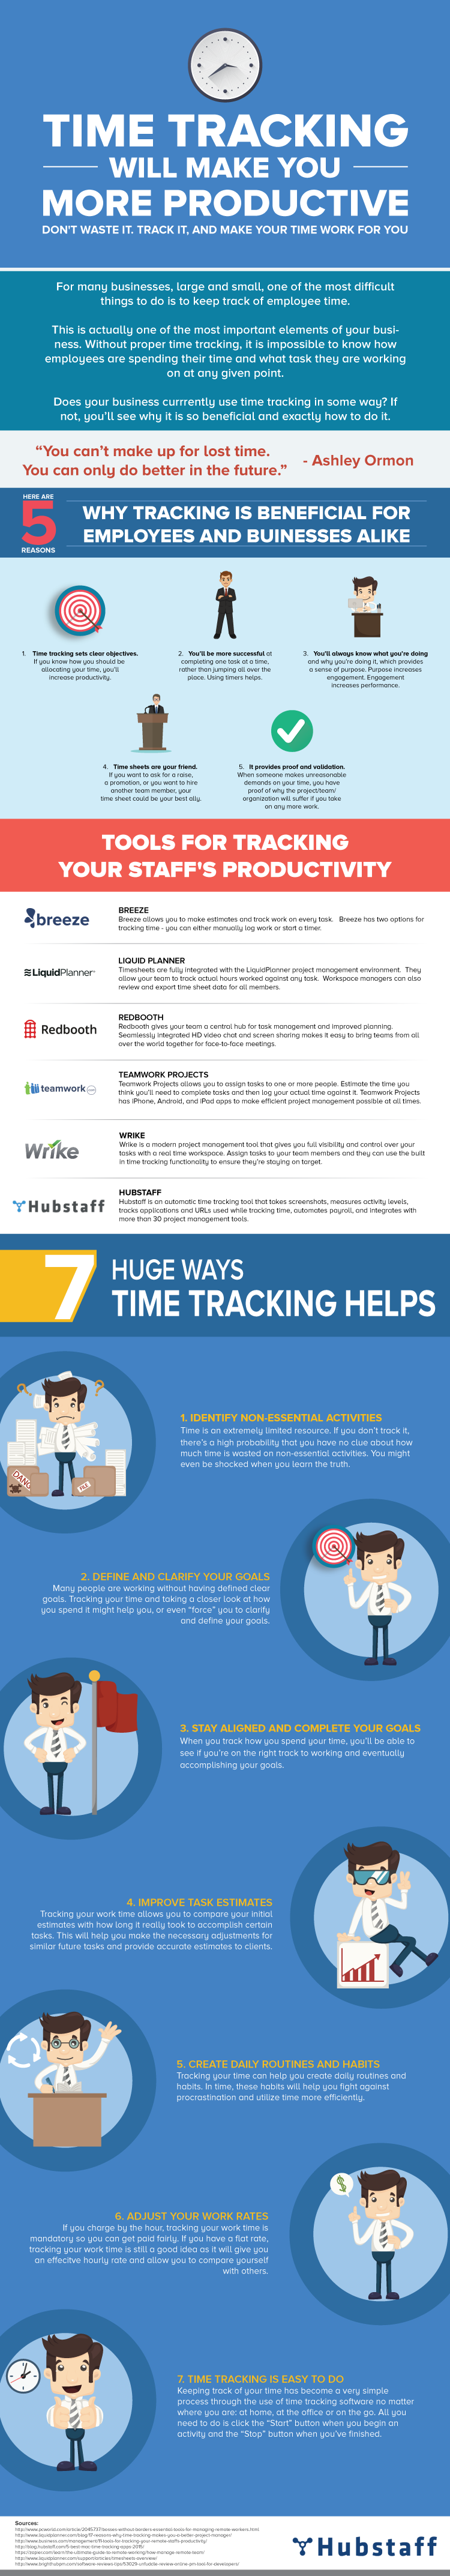 benefits-of-time-tracking